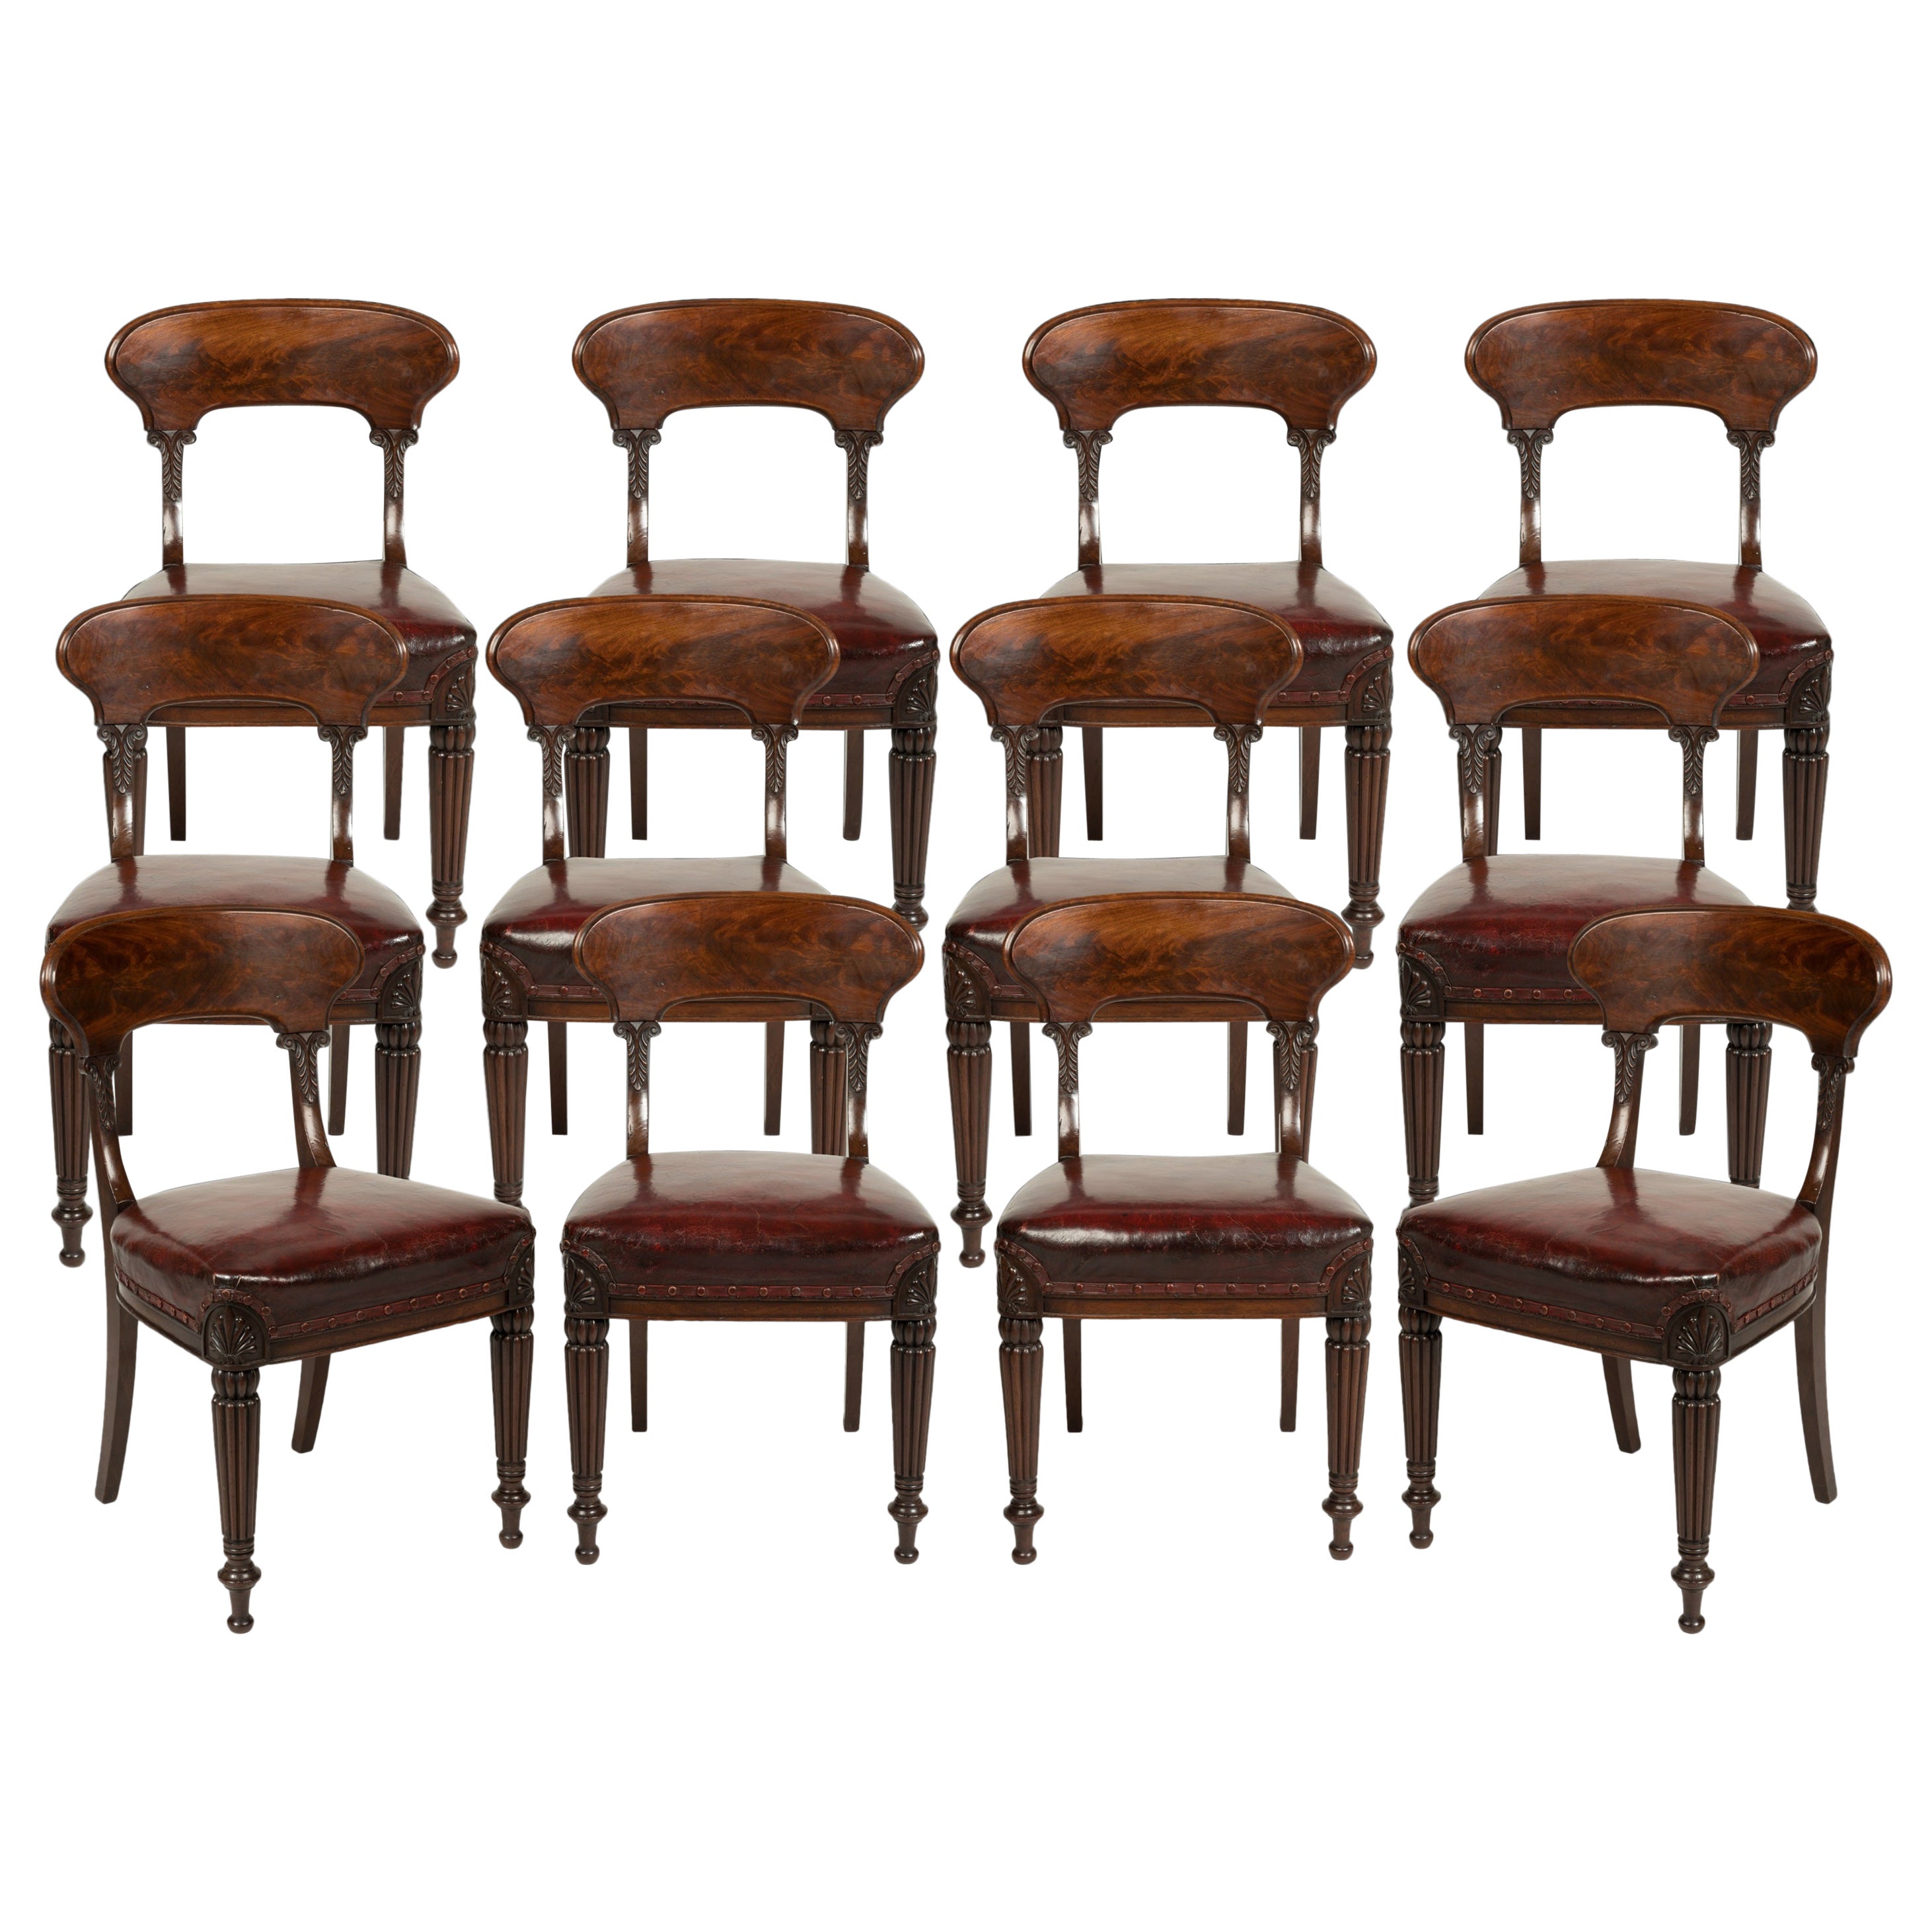 Set of 12 Late Georgian Mahogany Dining Chairs attributed to Gillows For Sale